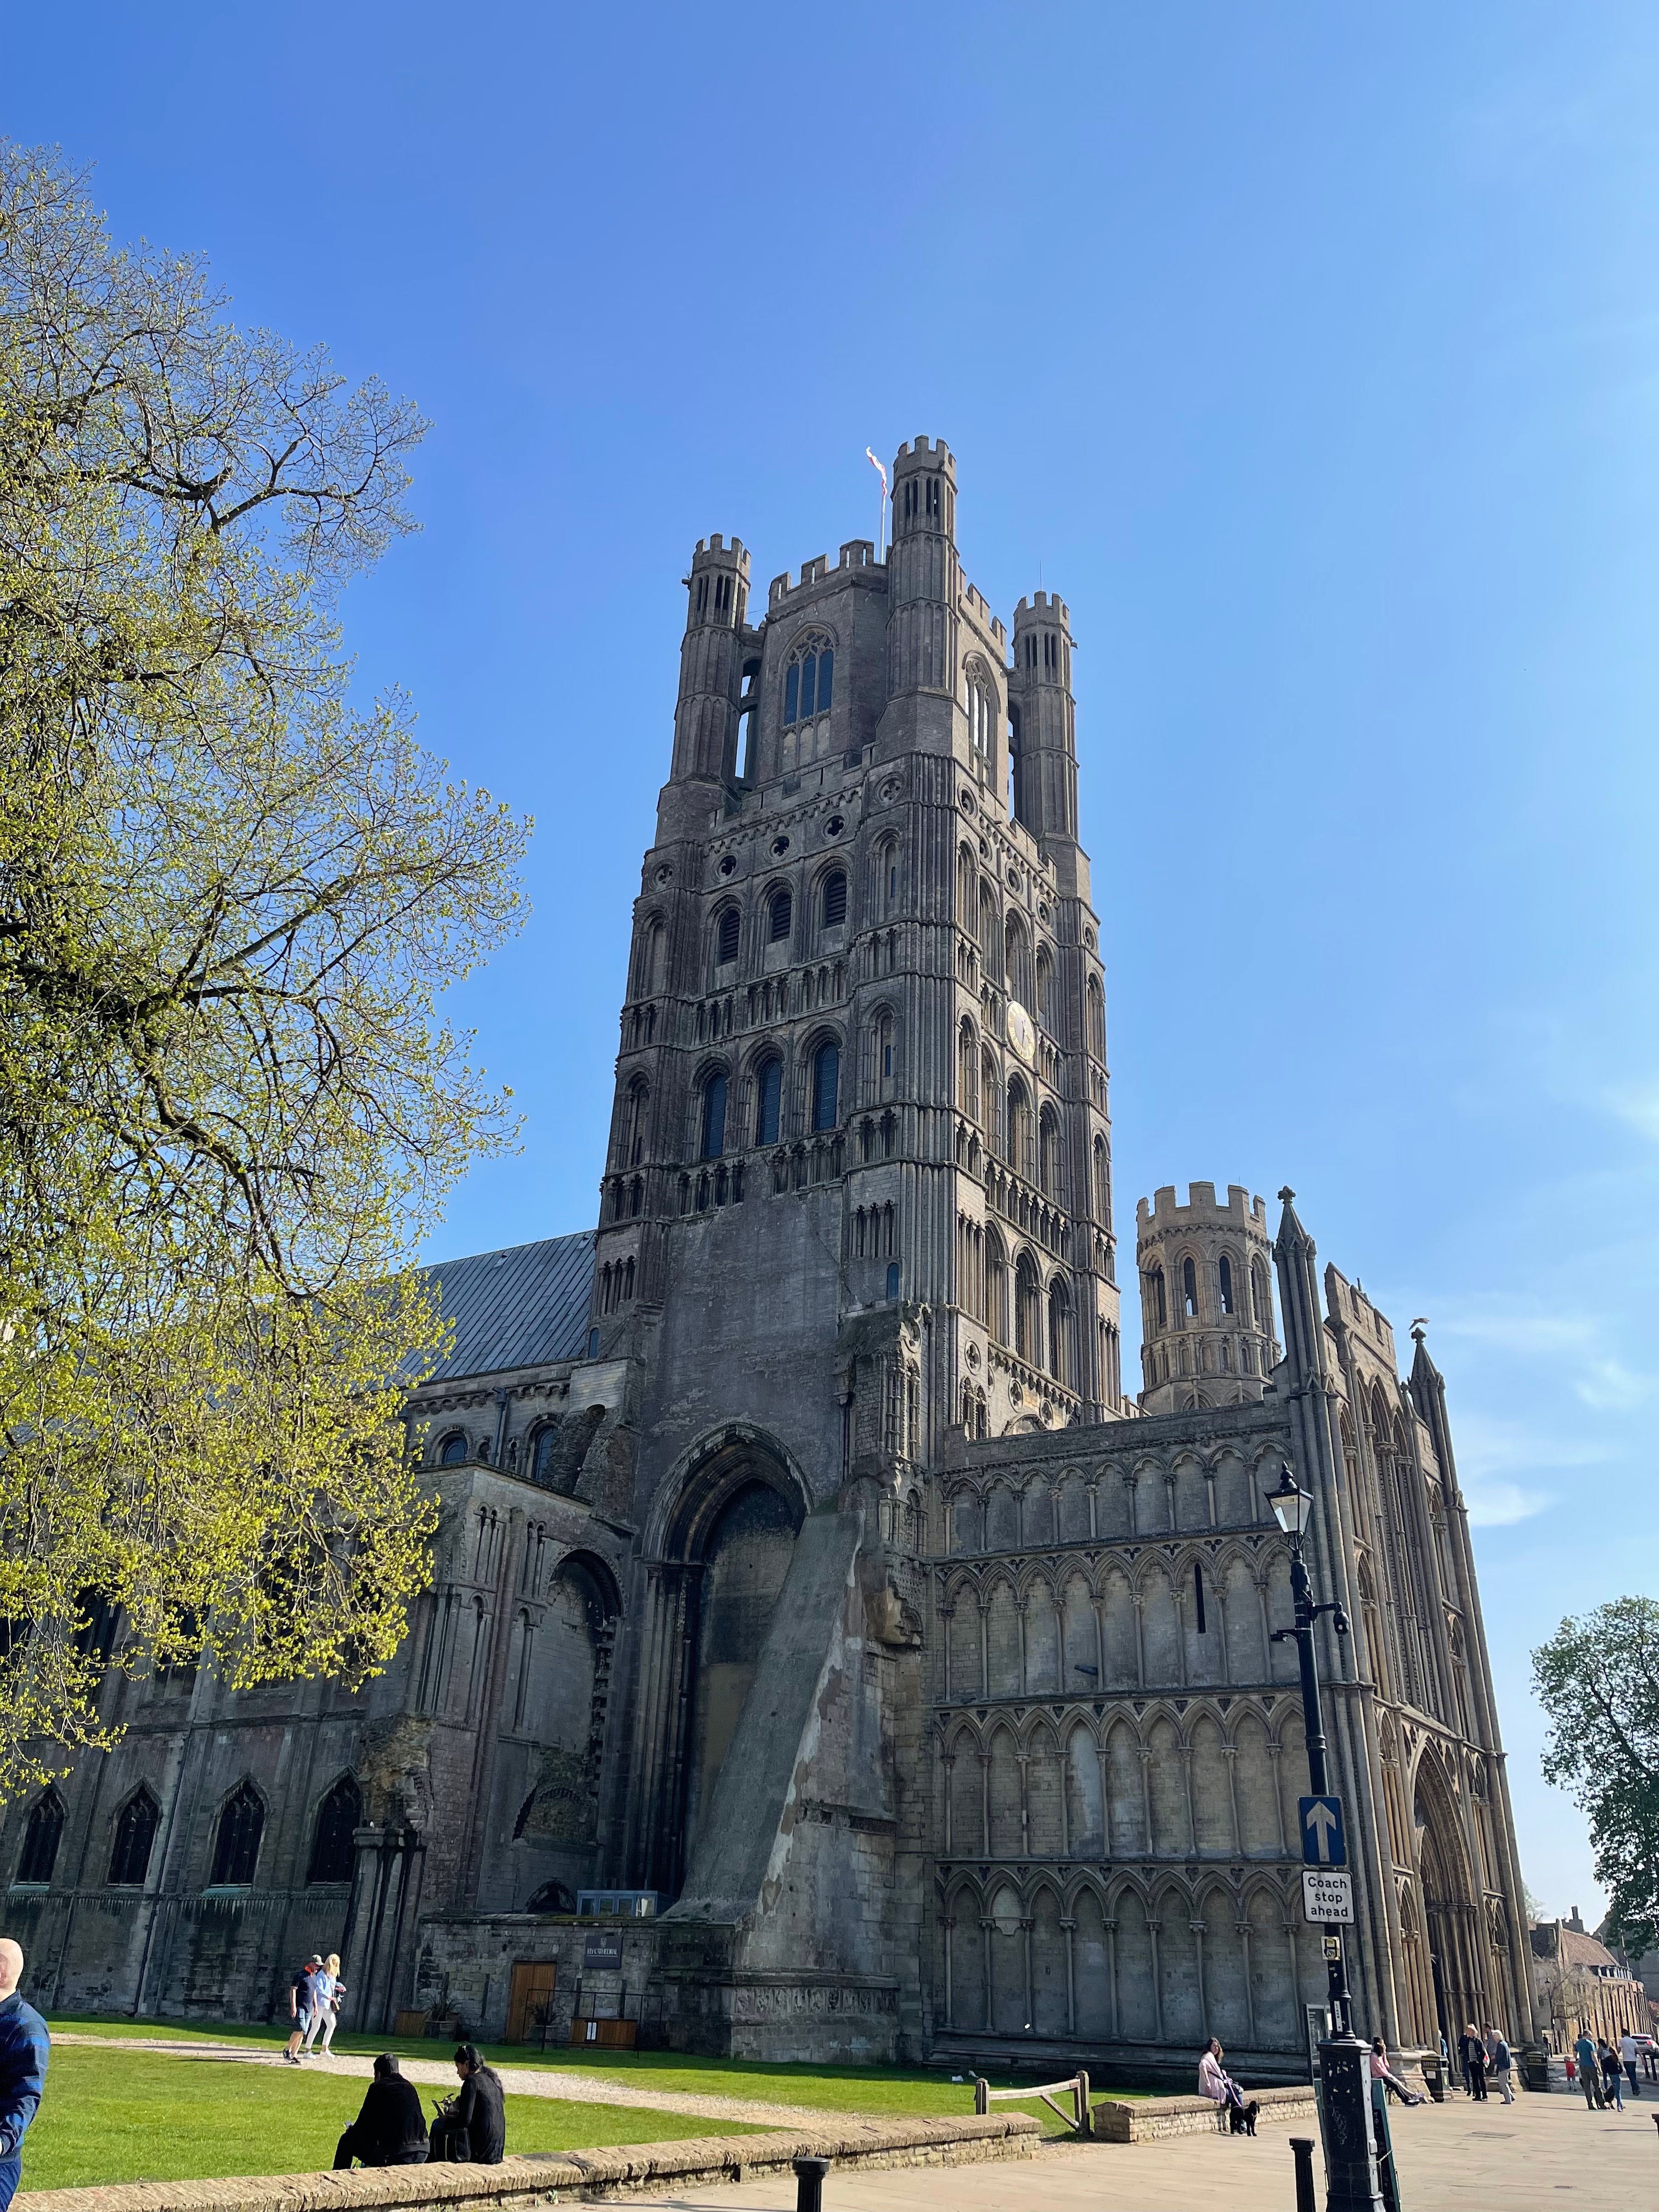 A day out in Ely: What to see and do